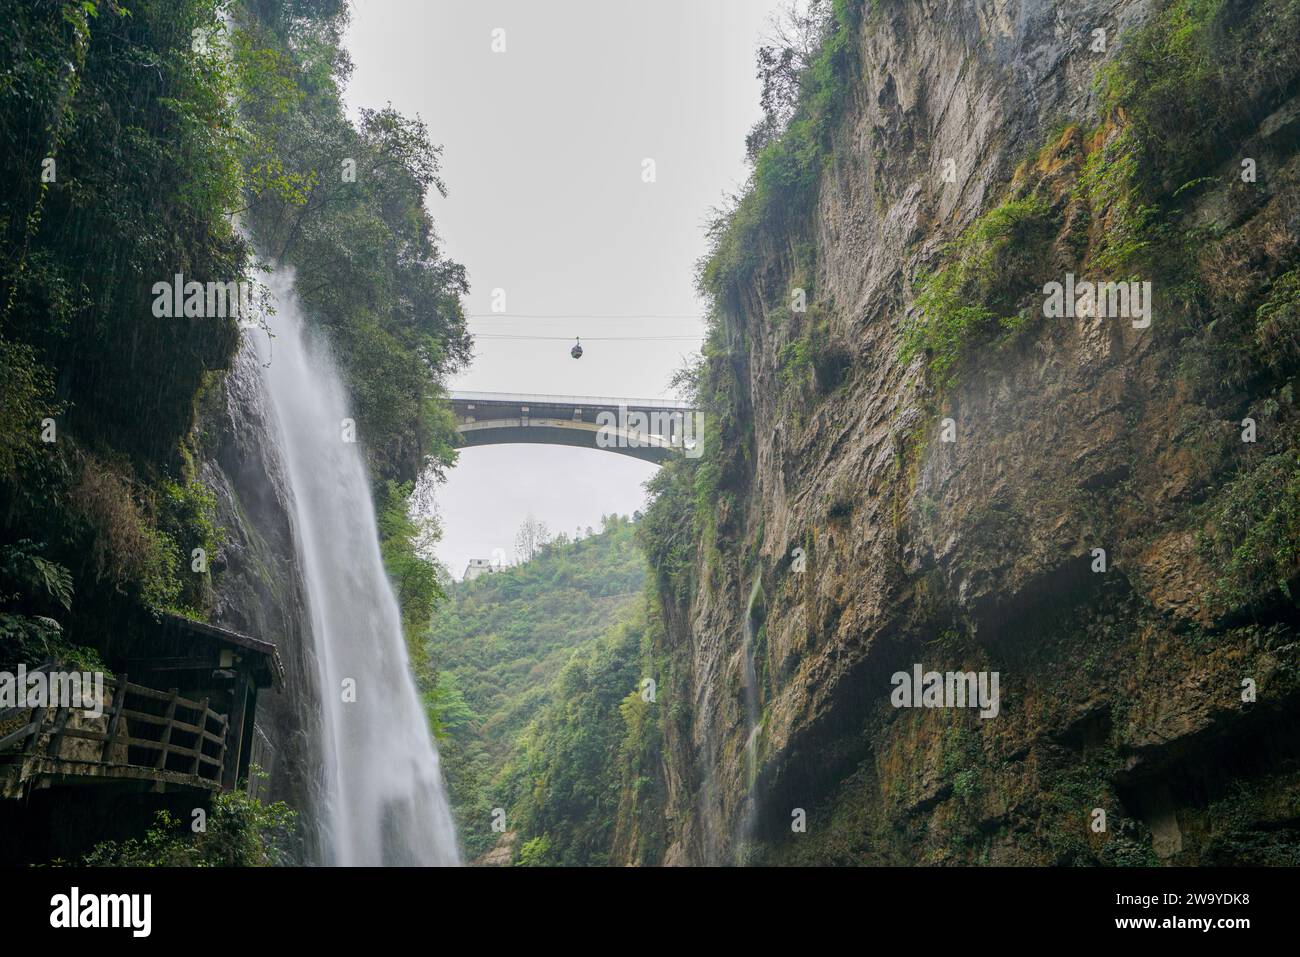 Lush vegetation and waterfalls. Bridges across canyons, cable cars in the sky. Enshi Yunlong Gorge is a 'karst terrain' in the field of geology. Hubei Stock Photo